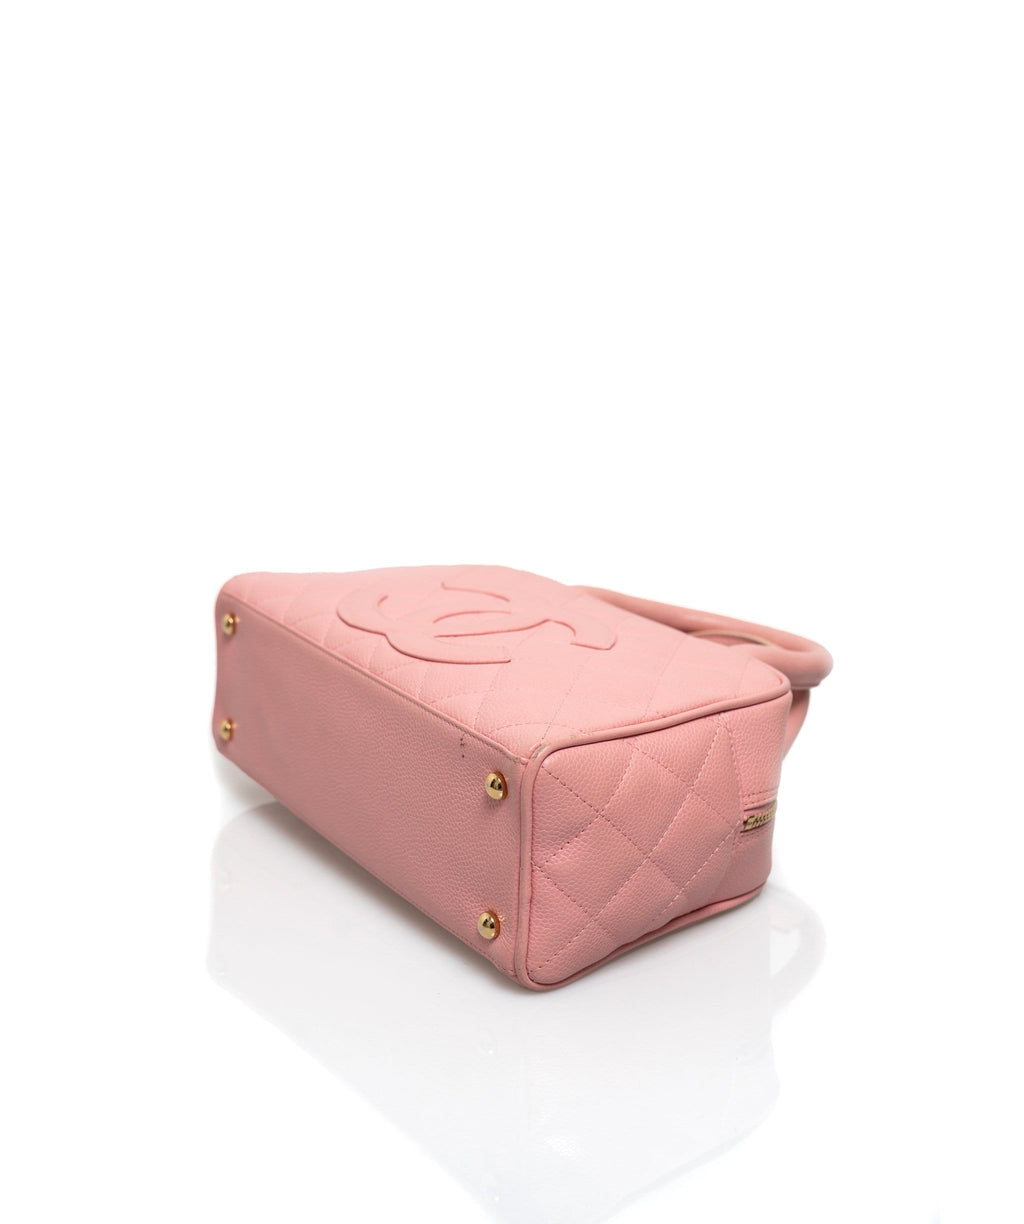 Chanel Leather Bowling Bag Pink  Second Edit